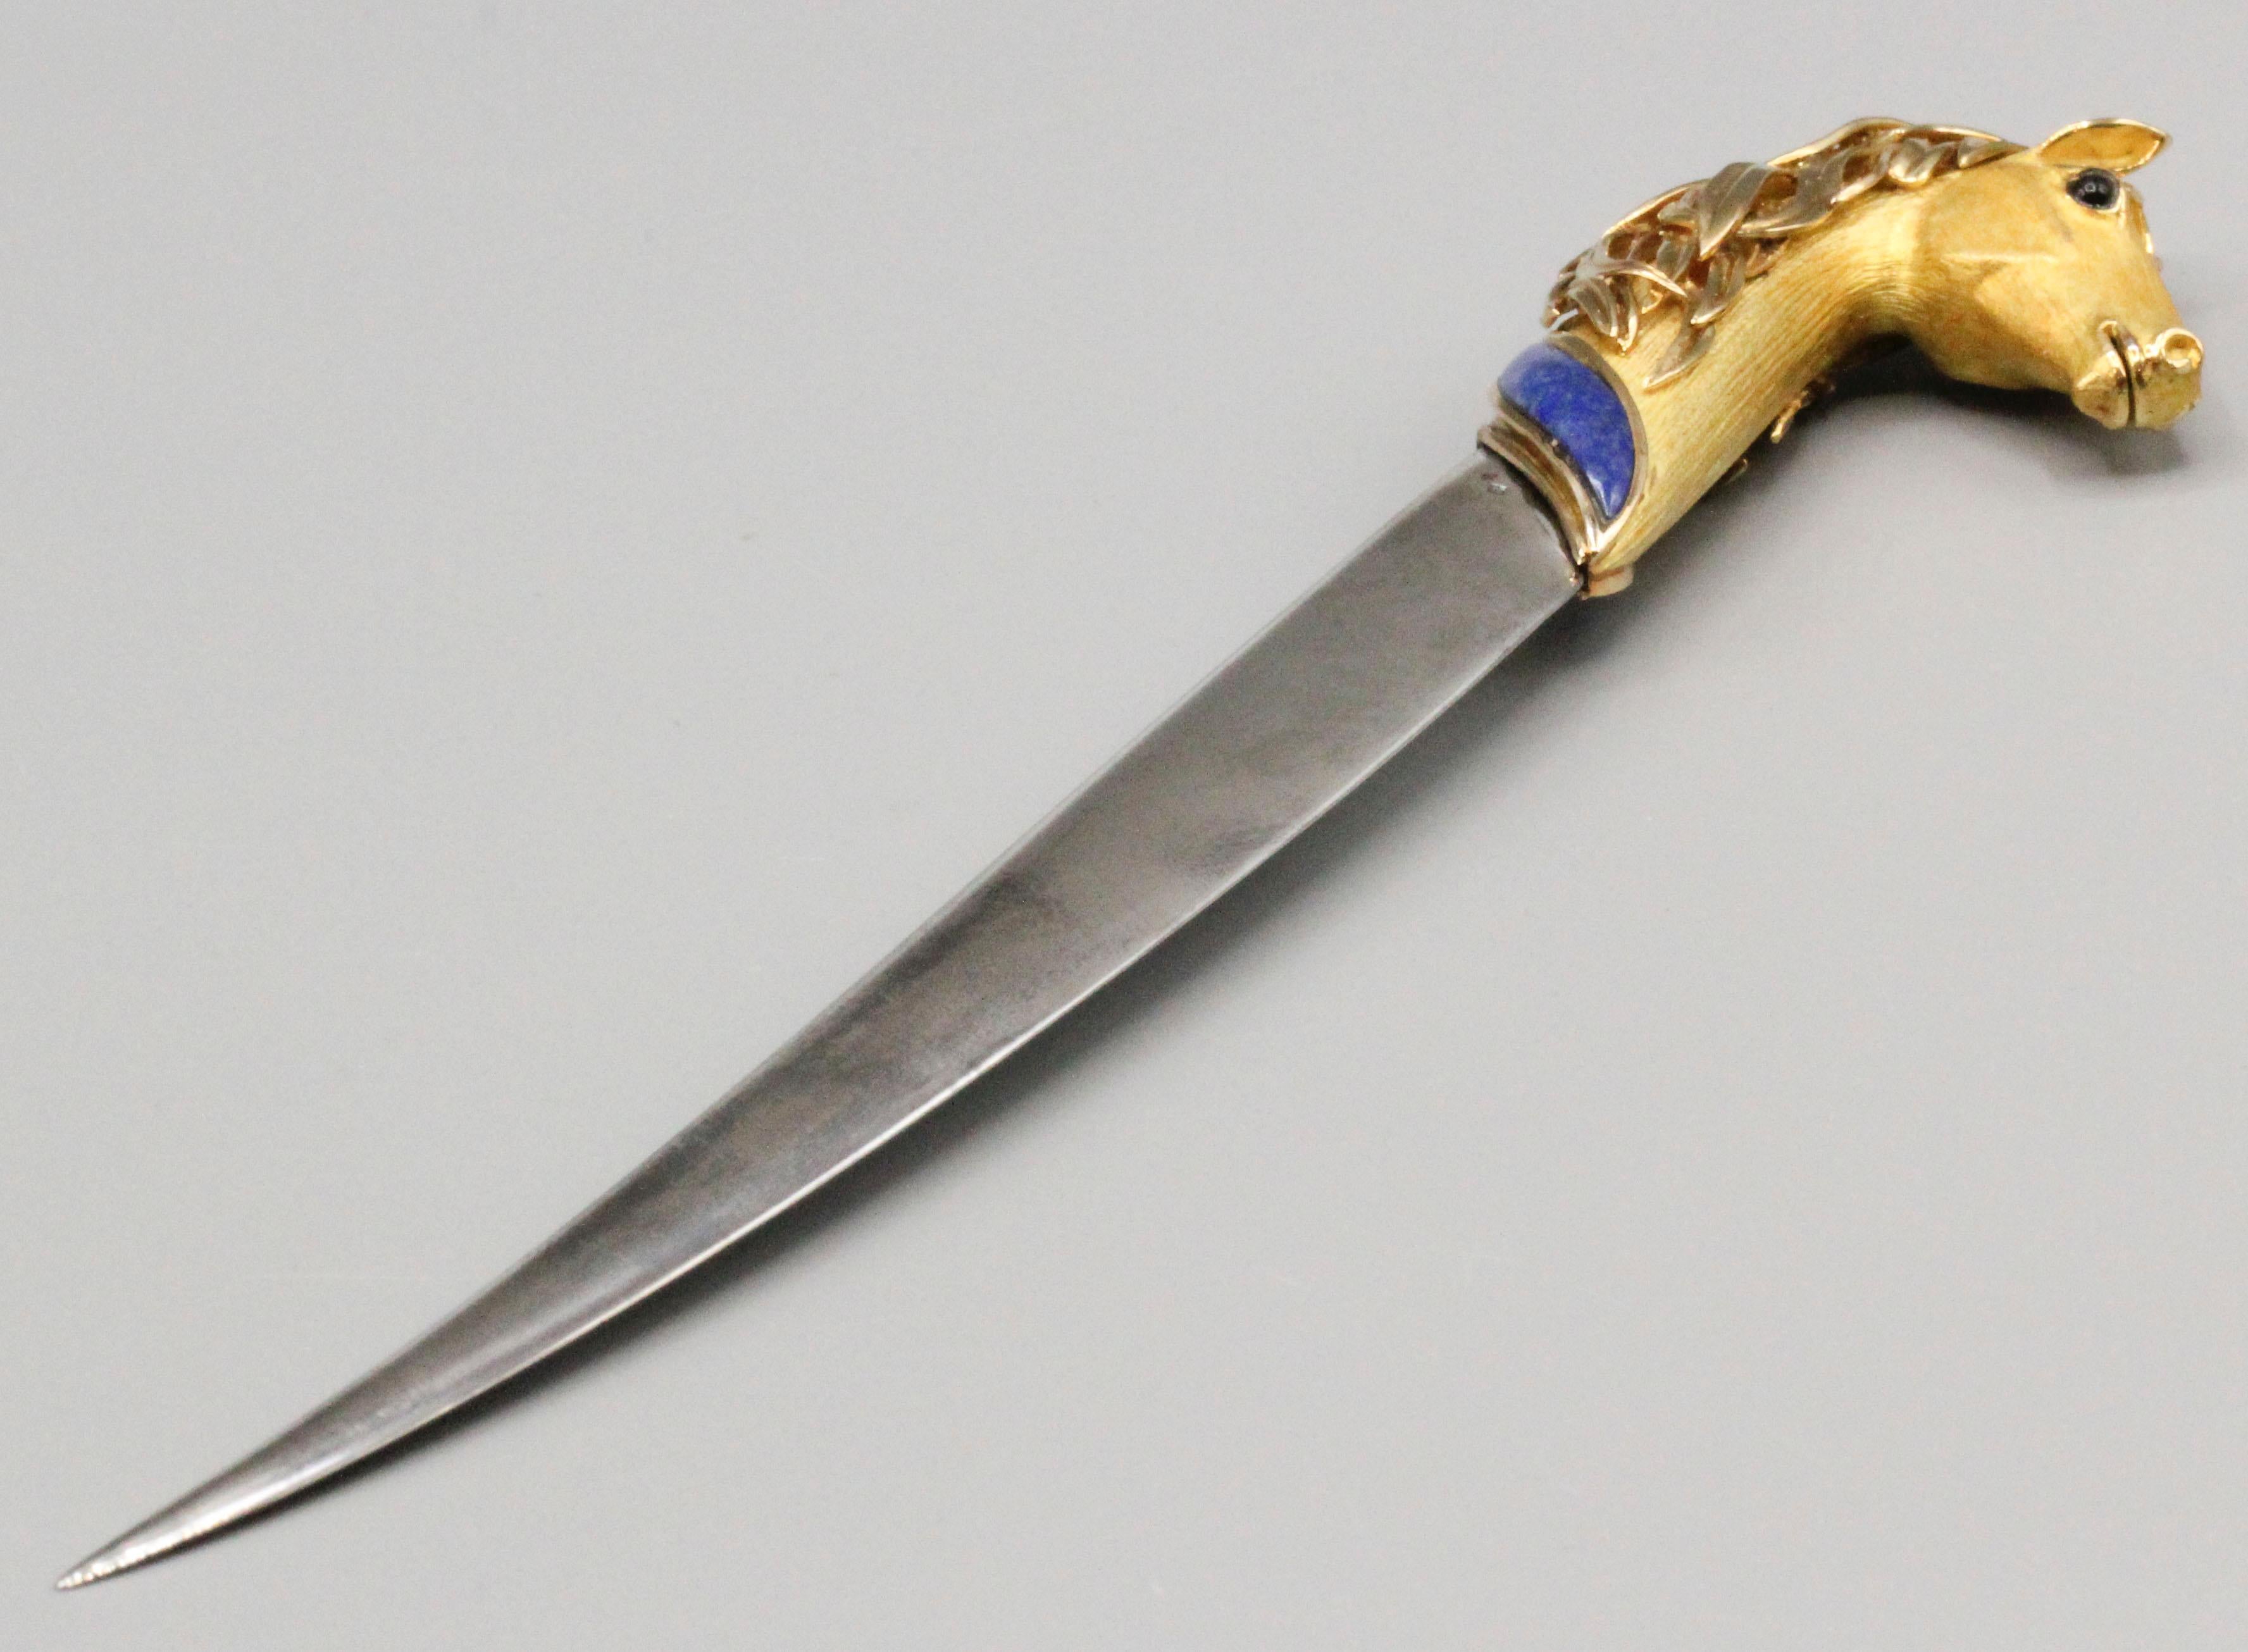 Very fine and rare letter opener by Patek Philippe, cicar 1960-70s. The letter opener is designed as a horse head with a satin like finish and polished gold hair made of 18k gold; the head is further accented with cabochon sapphire eyes and a lapis